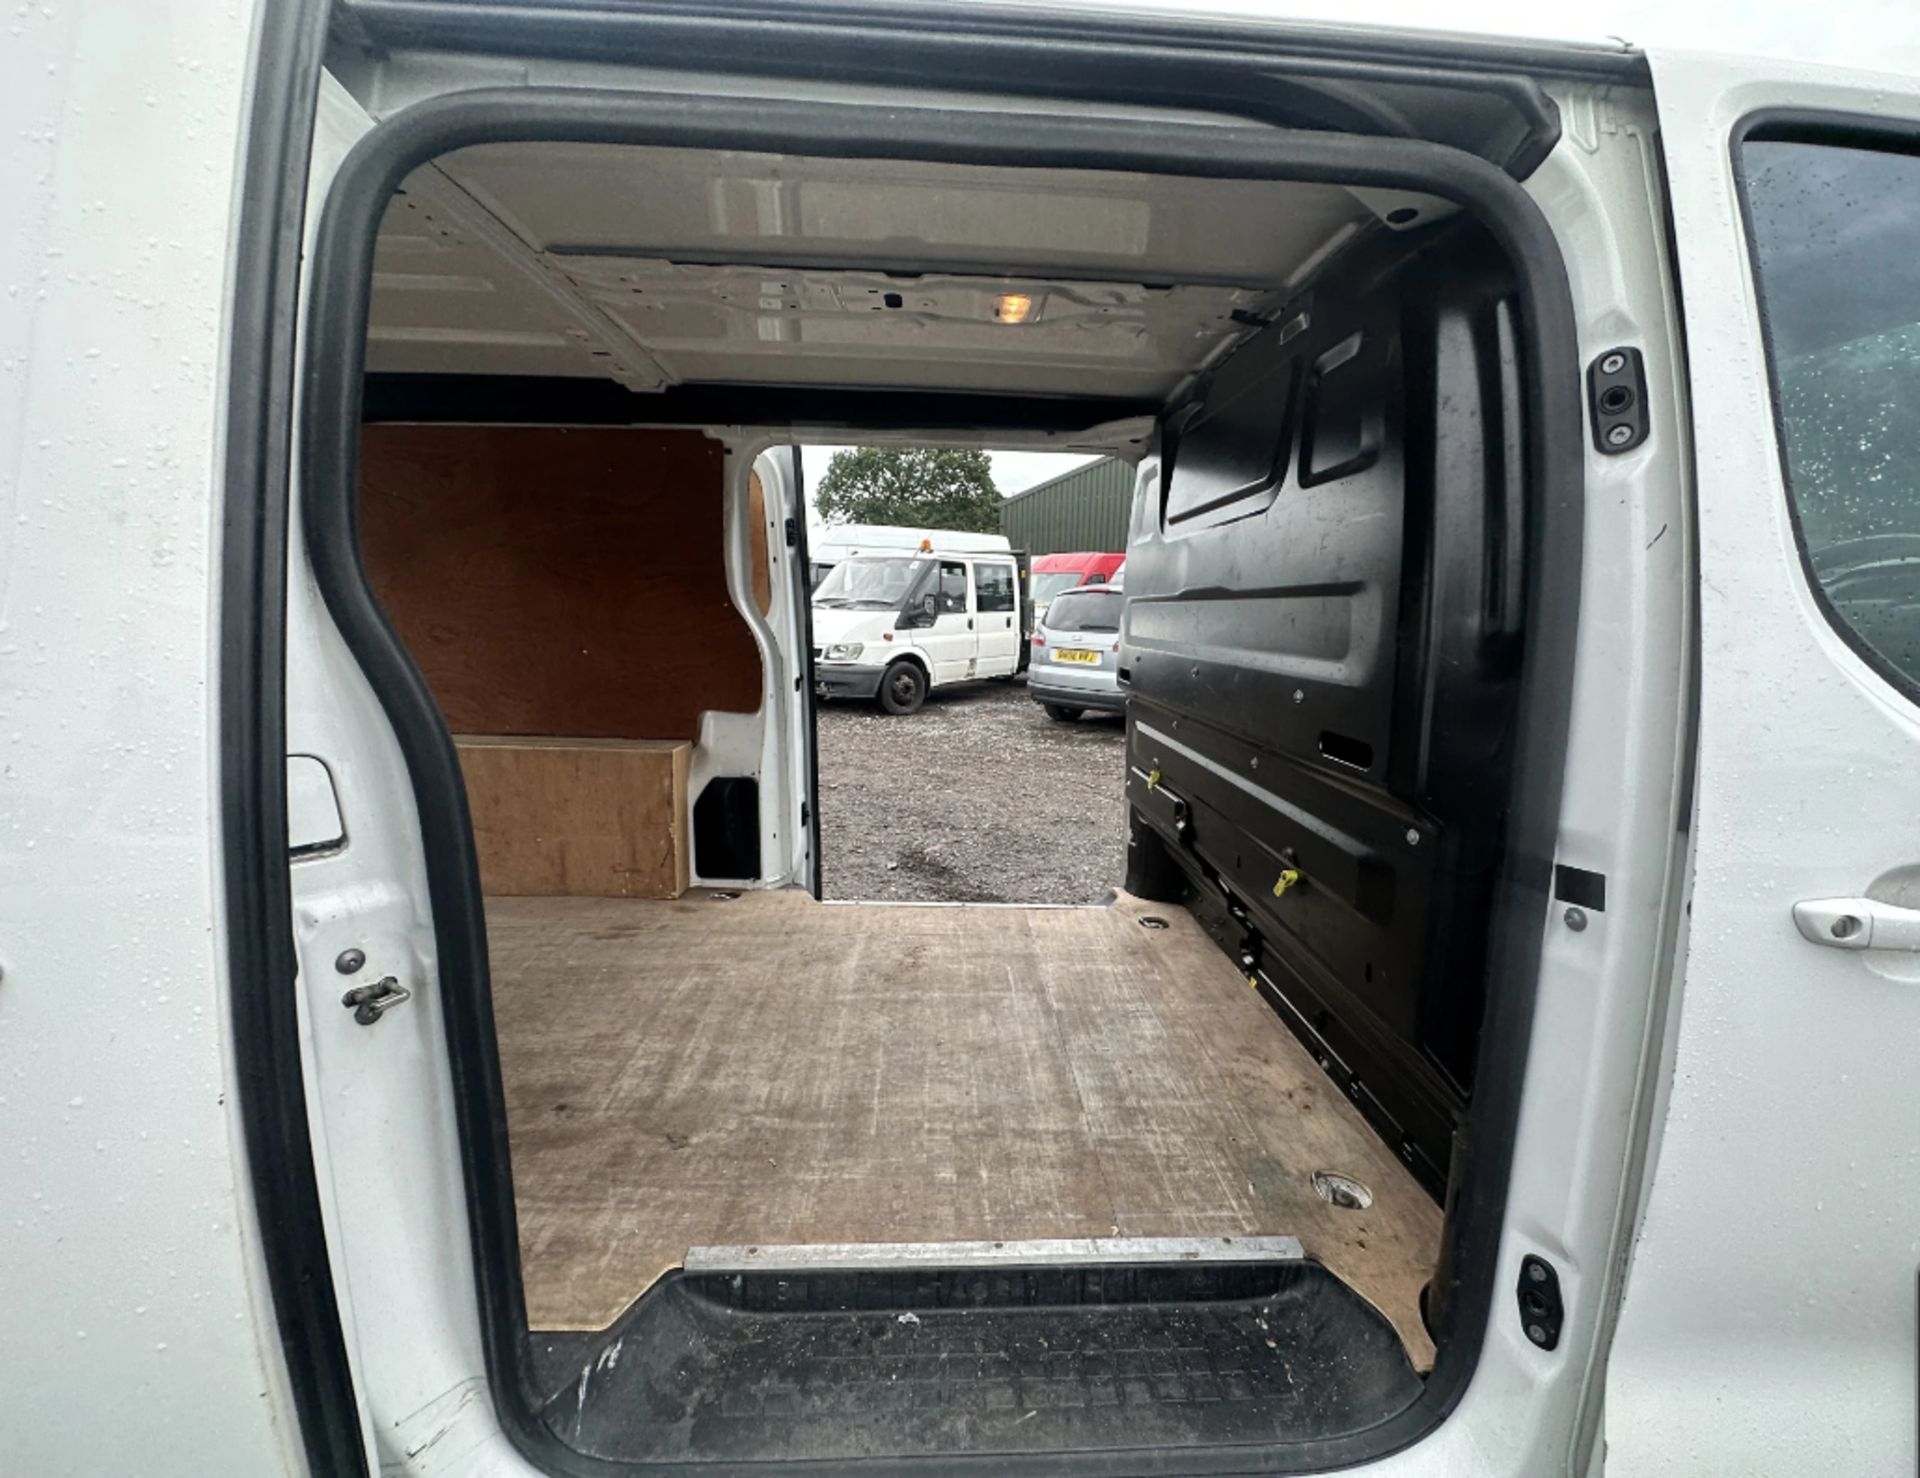 LOW-MILEAGE ONLY 70K MILES - 2019 VIVARO L2 DIESEL: READY TO ROLL - Image 7 of 11